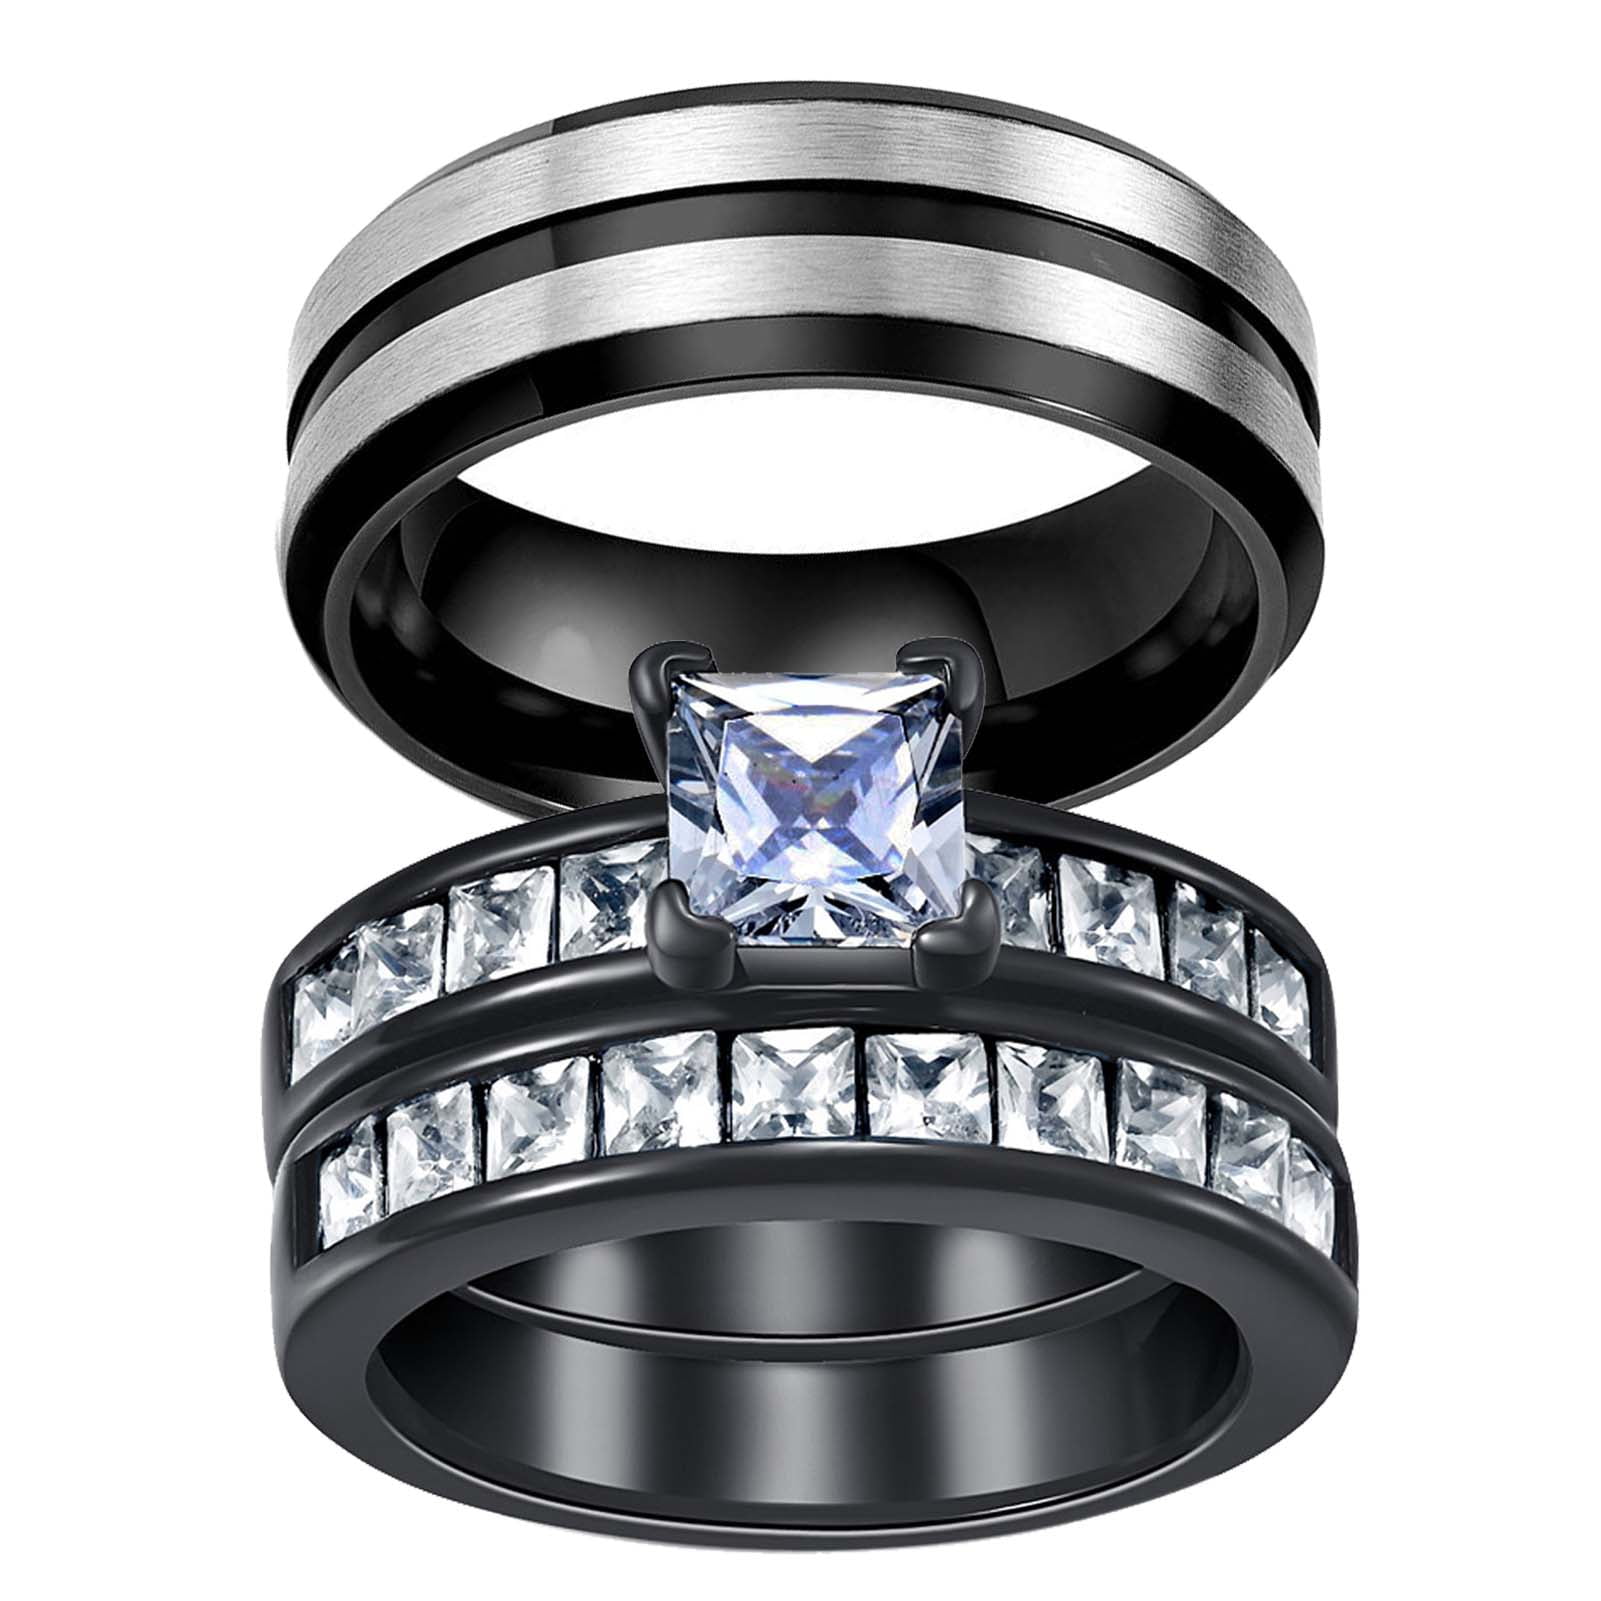 Bridal Wedding Bands Decorative Bands Stainless Steel Polished Grooved Black CZ Ring Size 9.5